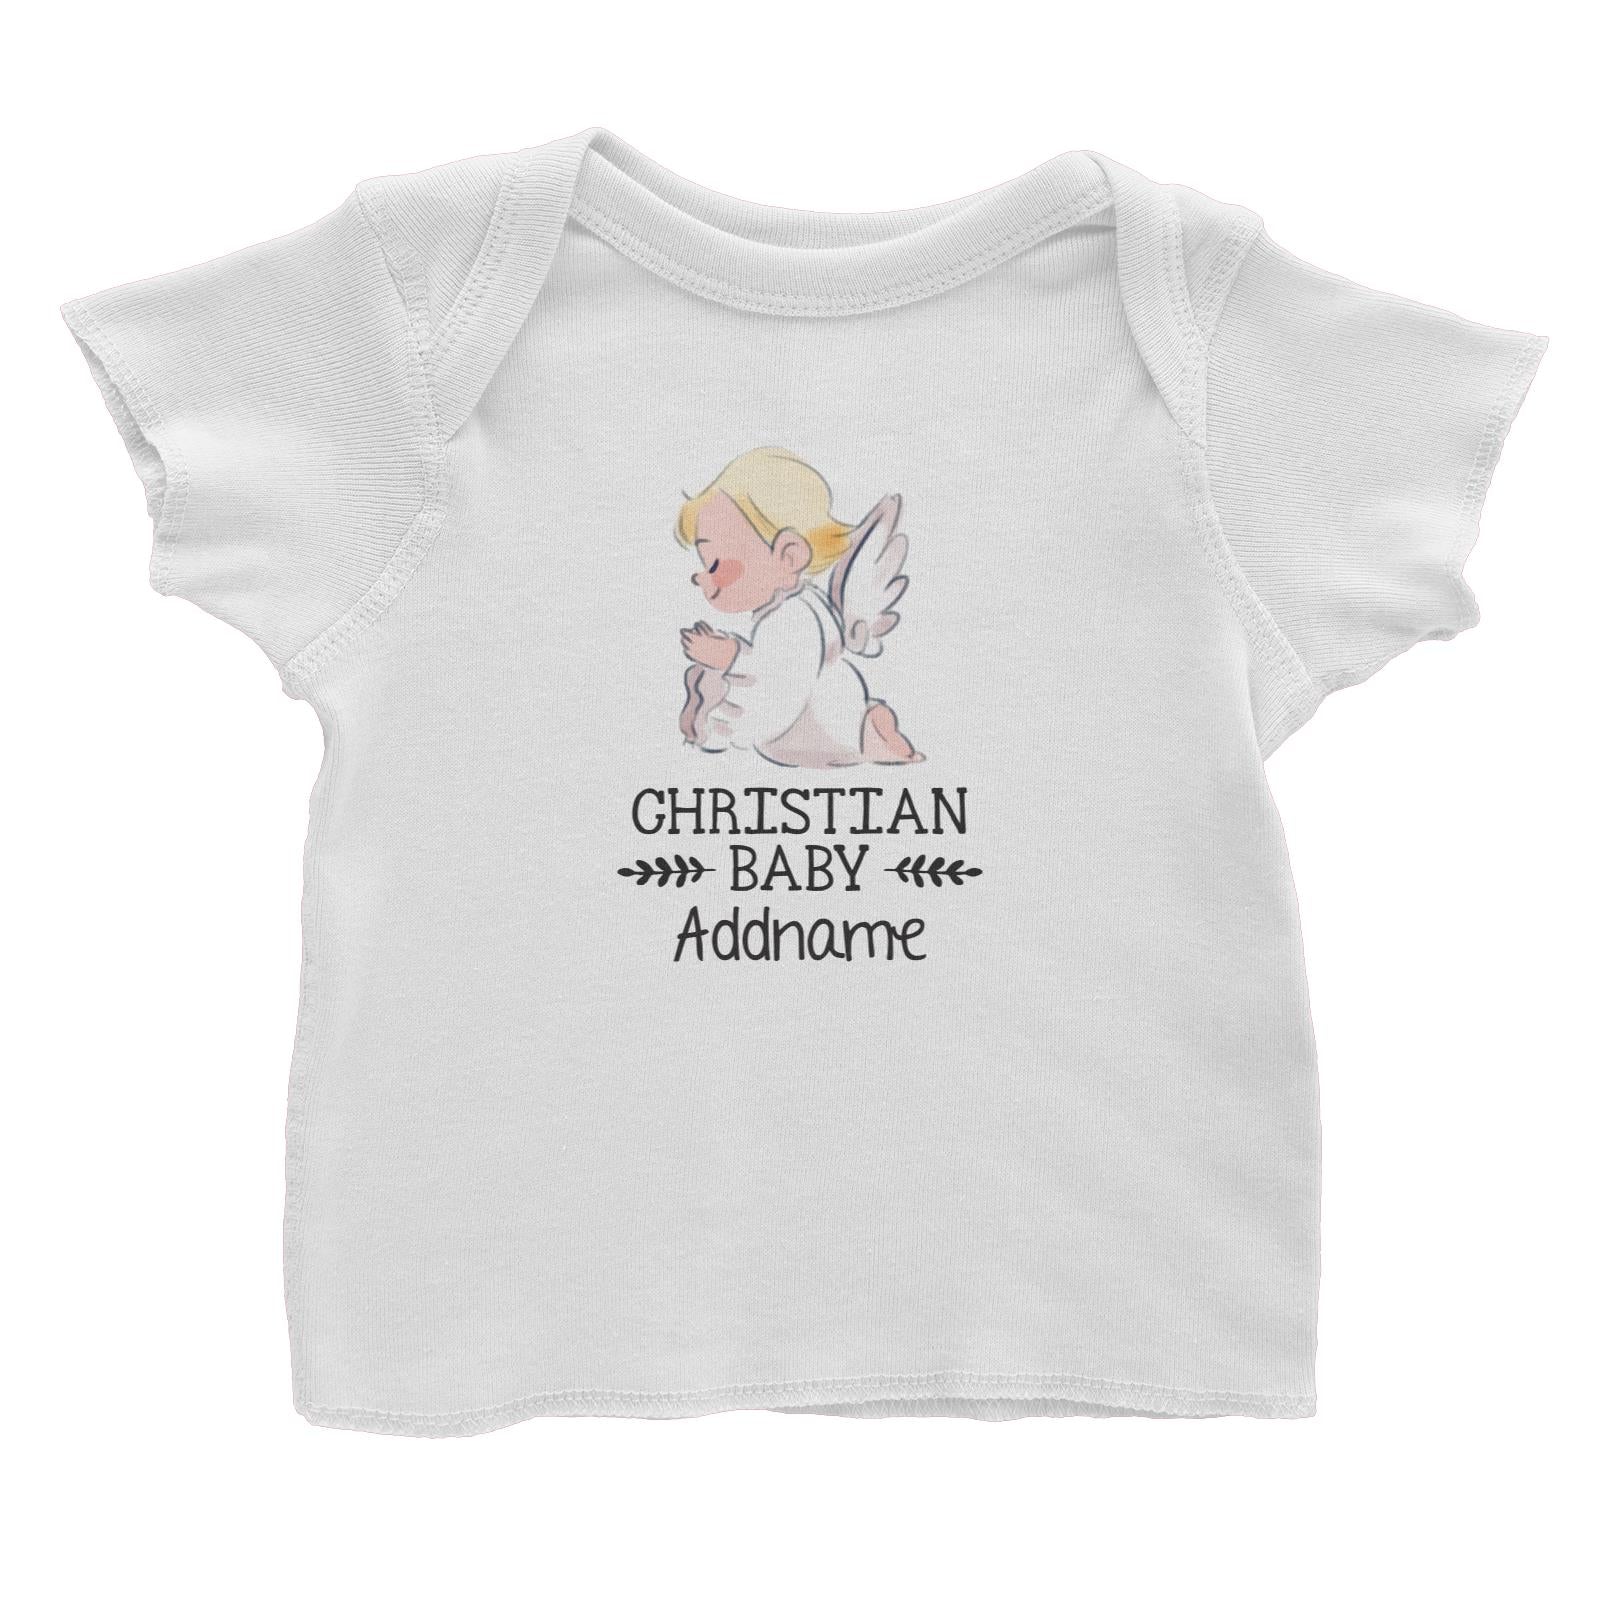 Christian Baby Angel Christian Baby Addname Baby T-Shirt